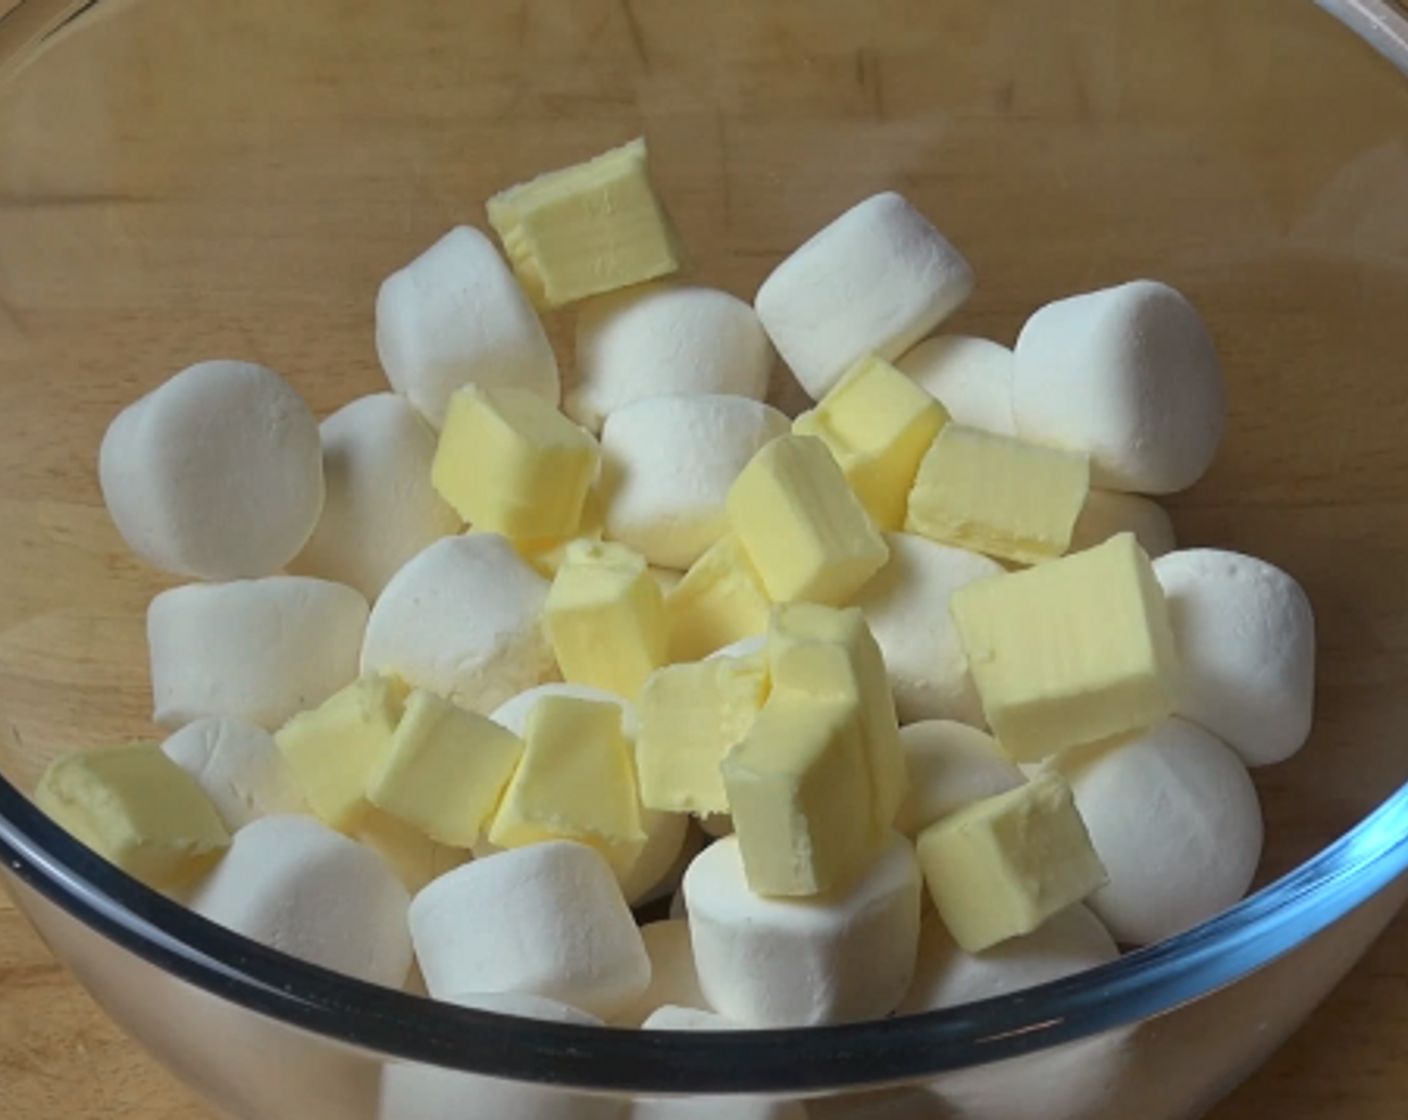 step 1 In a bowl, add Marshmallows (7 oz) and chopped, Unsalted Butter (1/2 cup). Microwave on high for about a minute. Stir every 30 seconds until smooth.